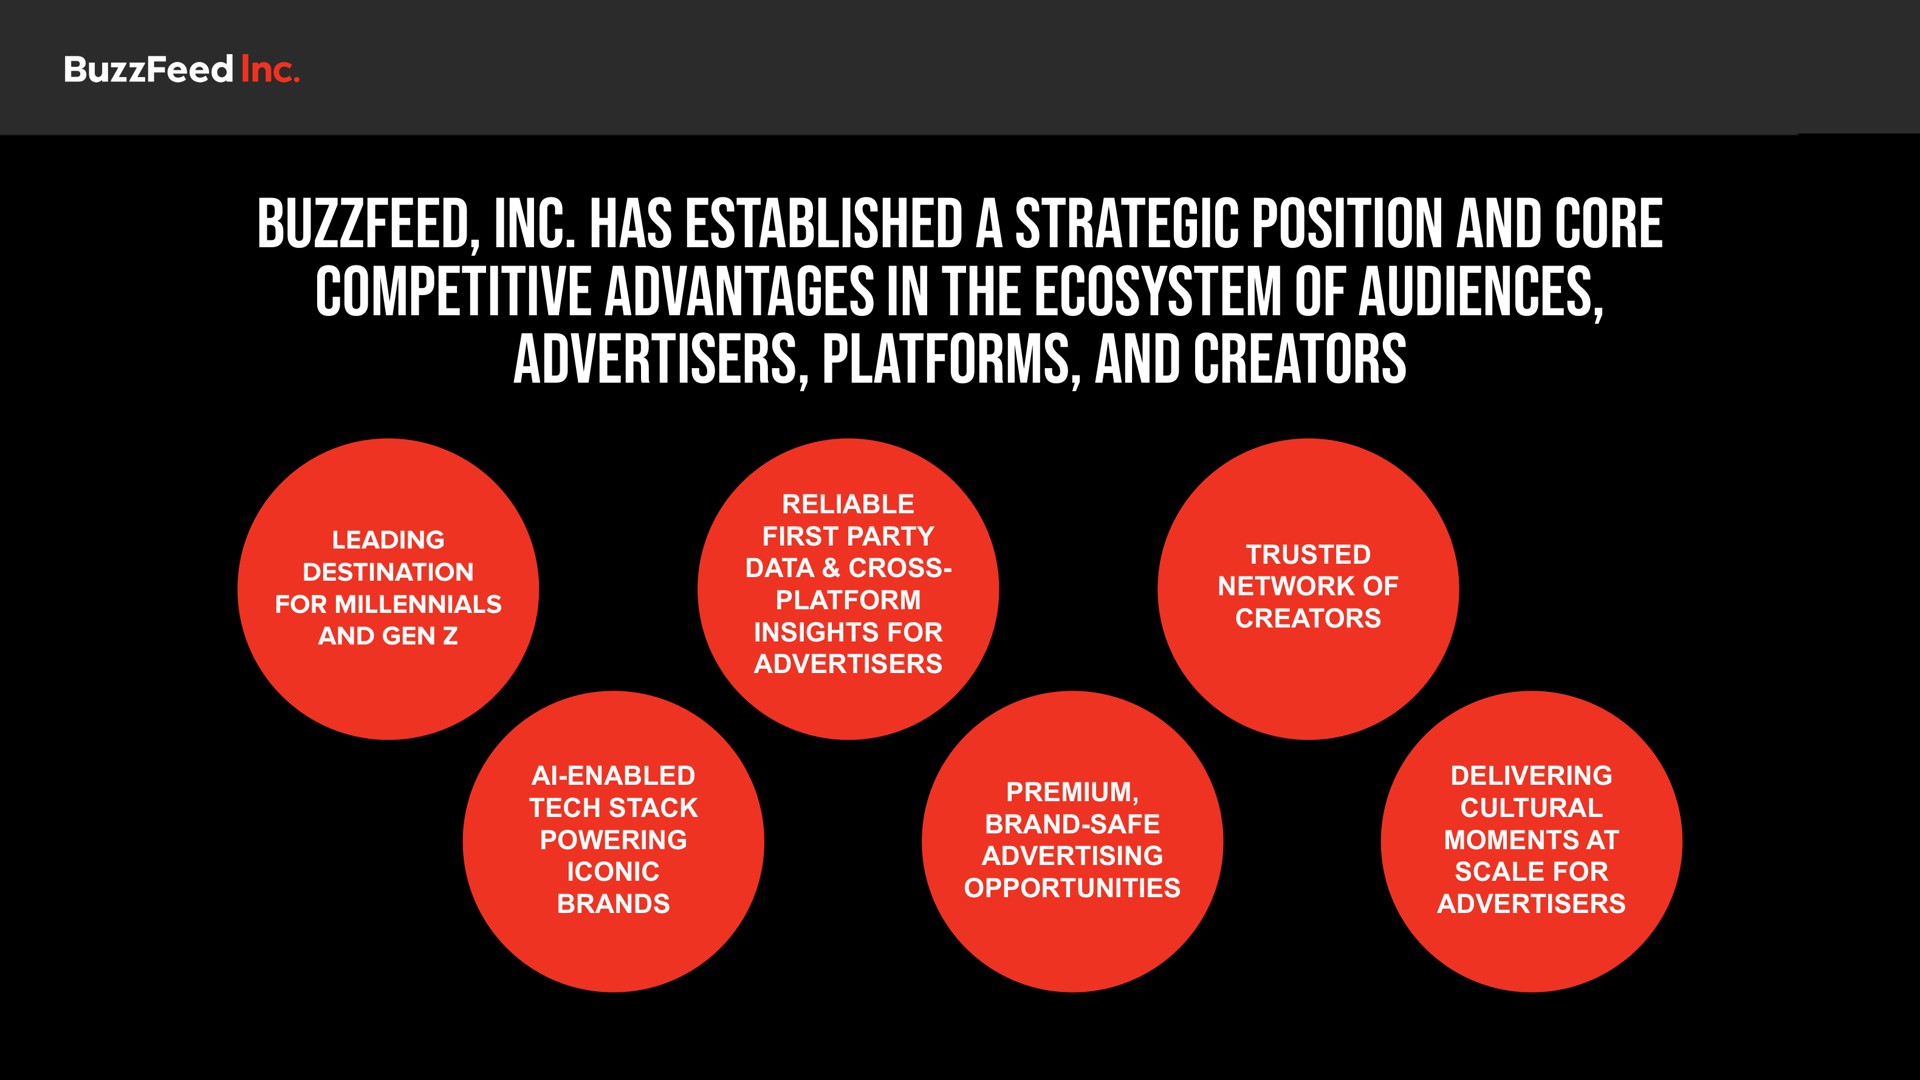 has established a strategic position and core competitive advantages in the ecosystem of audiences advertisers platforms and creators vase ads | BuzzFeed